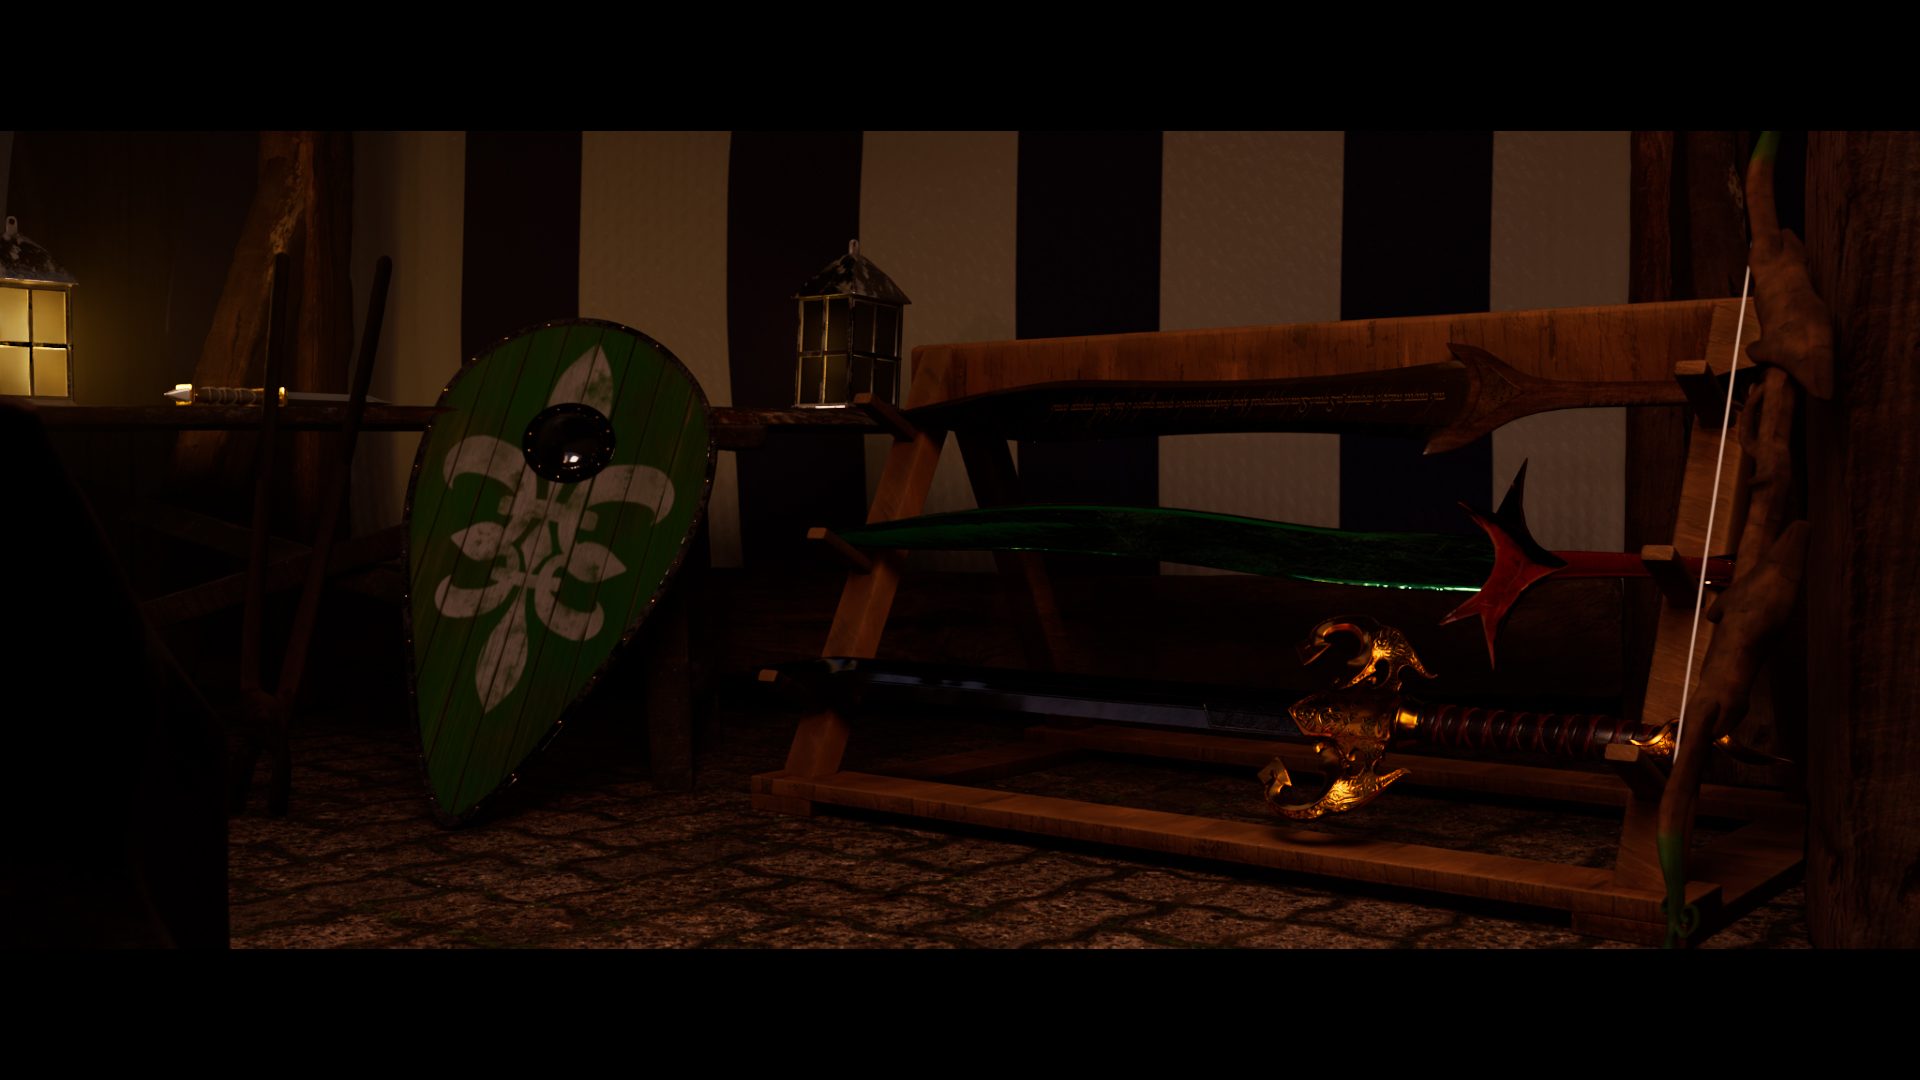 A rendered image of a medieval style market stall selling weapons.